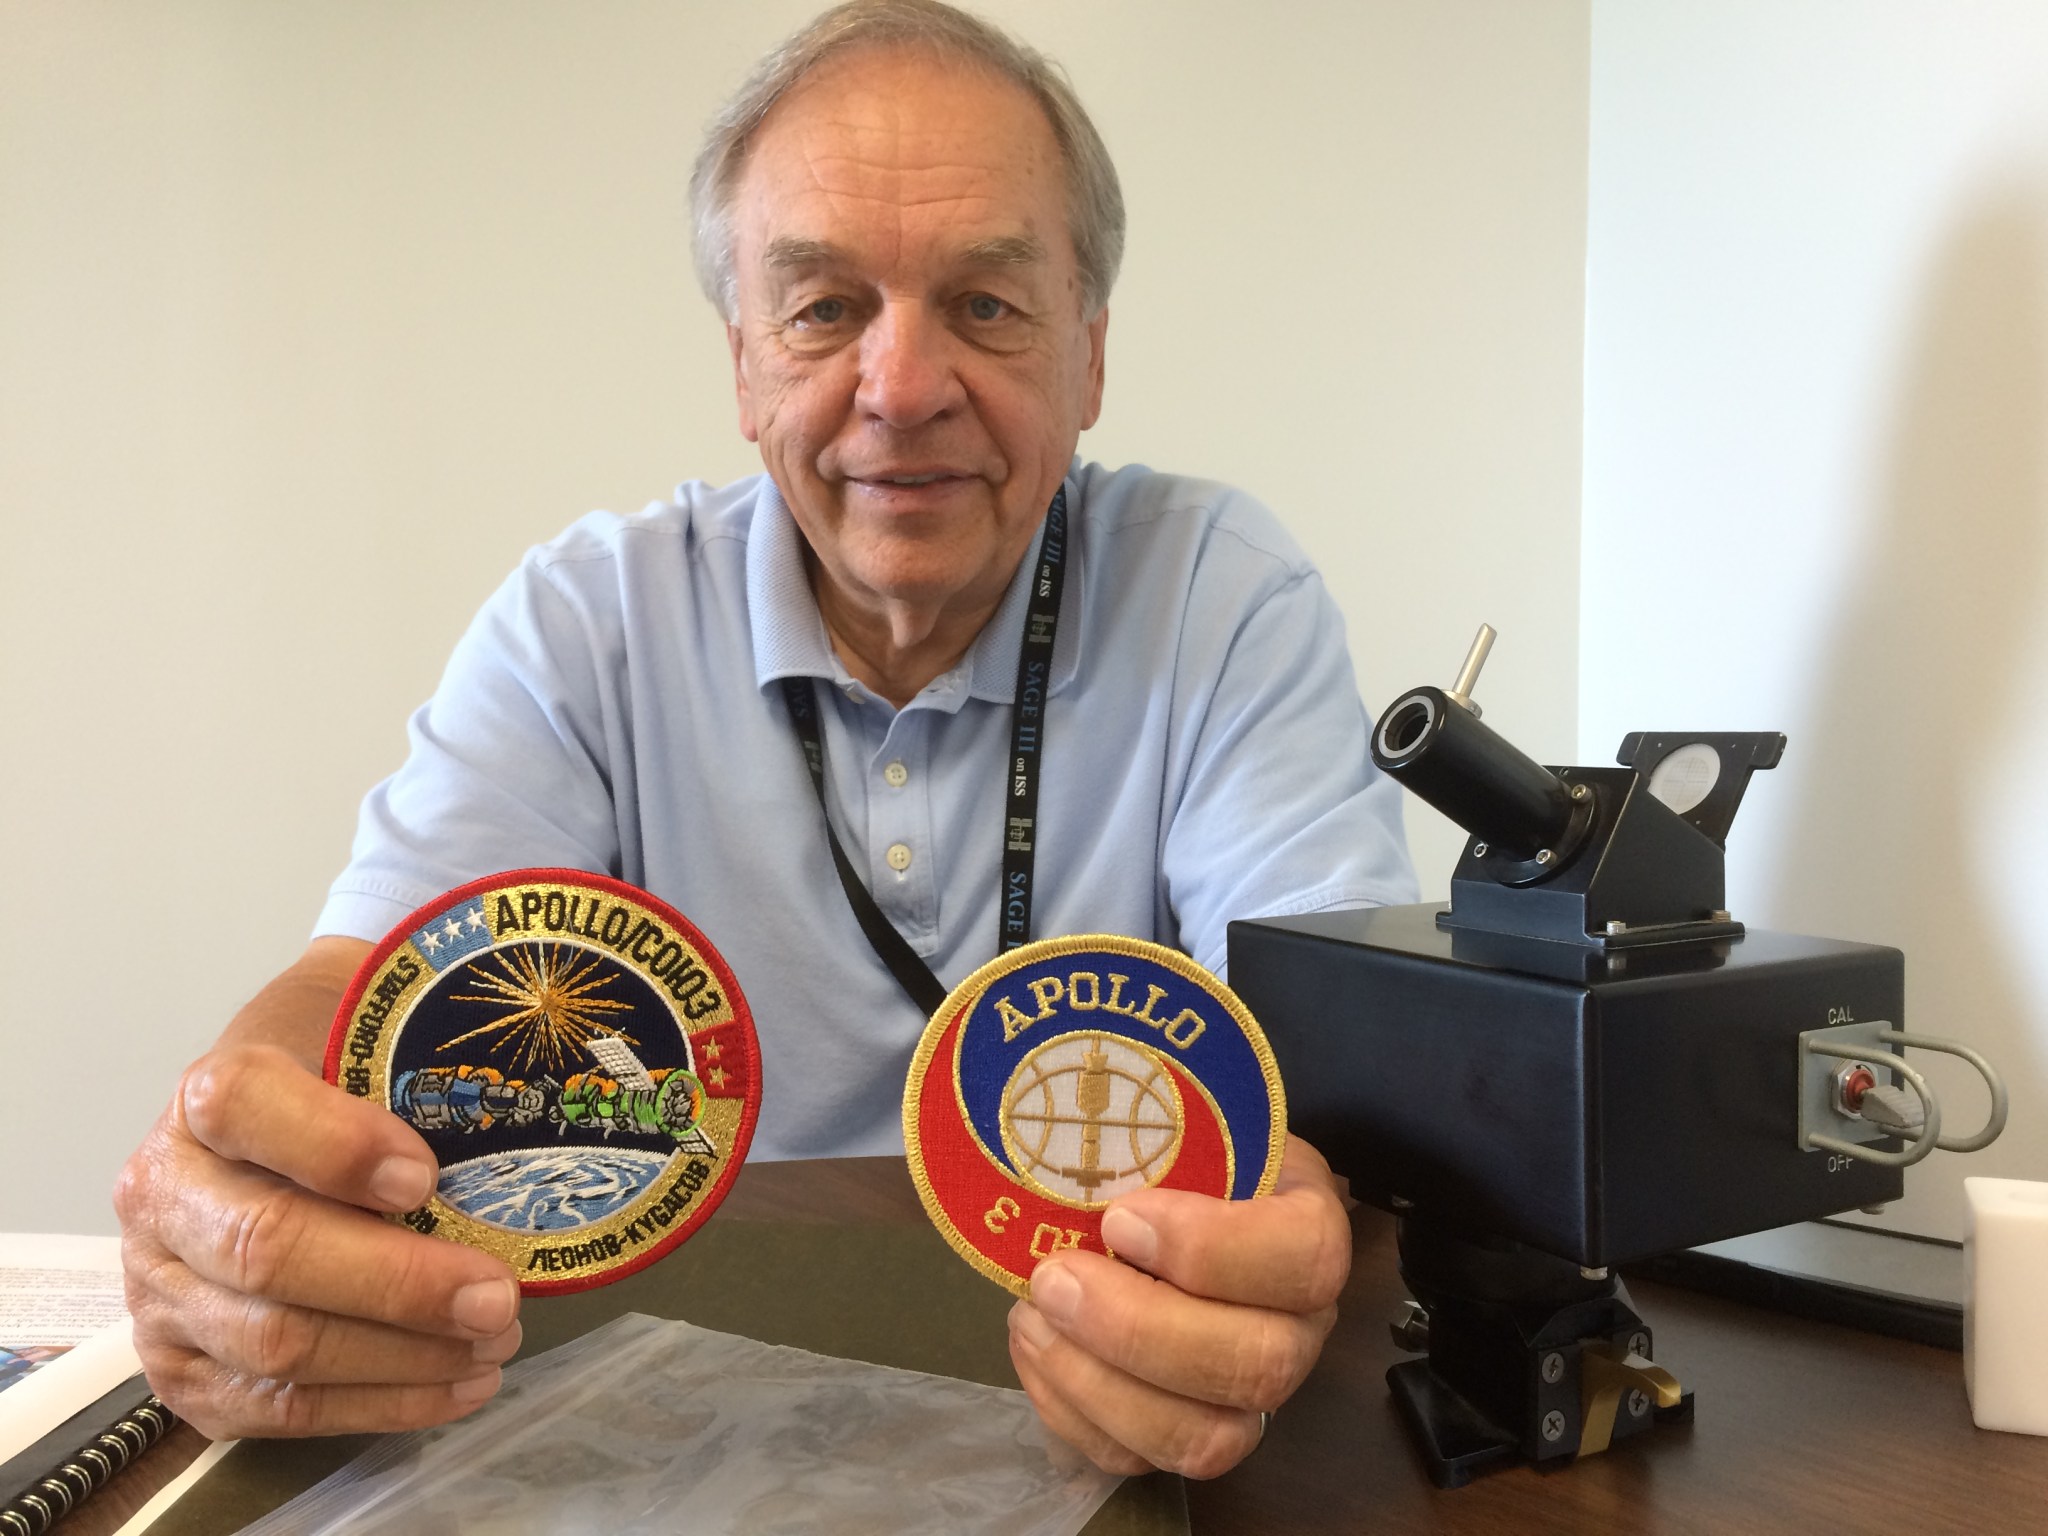 Pat McCormick shows off patches from the Apollo-Soyuz Test Project.